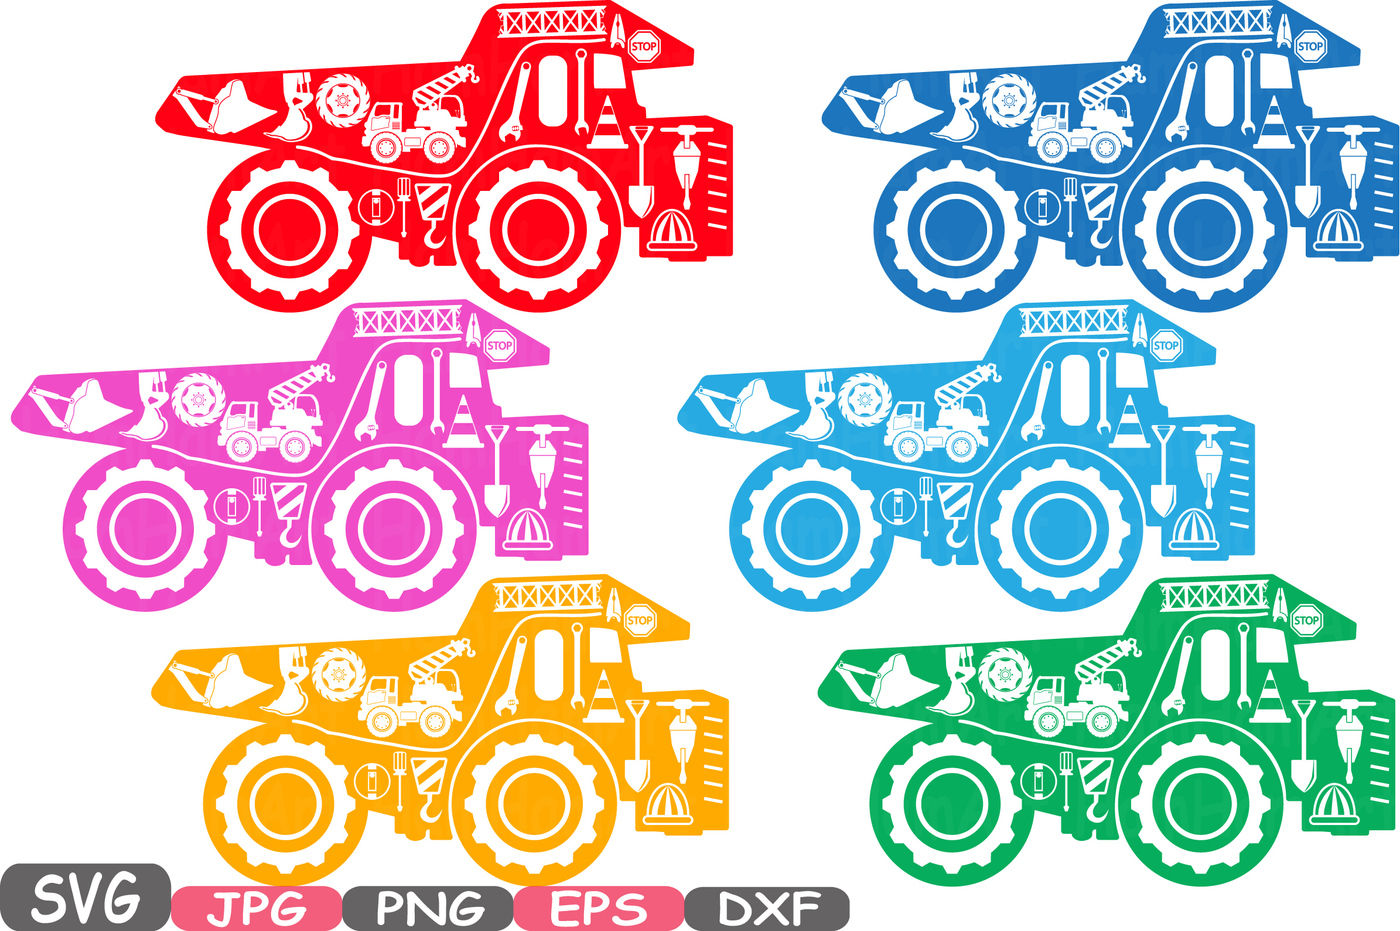 Construction Machines Dump Trucks Silhouette Svg File Cutting Files Stickers Builders Construction Site Clipart Building Machine 645s By Hamhamart Thehungryjpeg Com